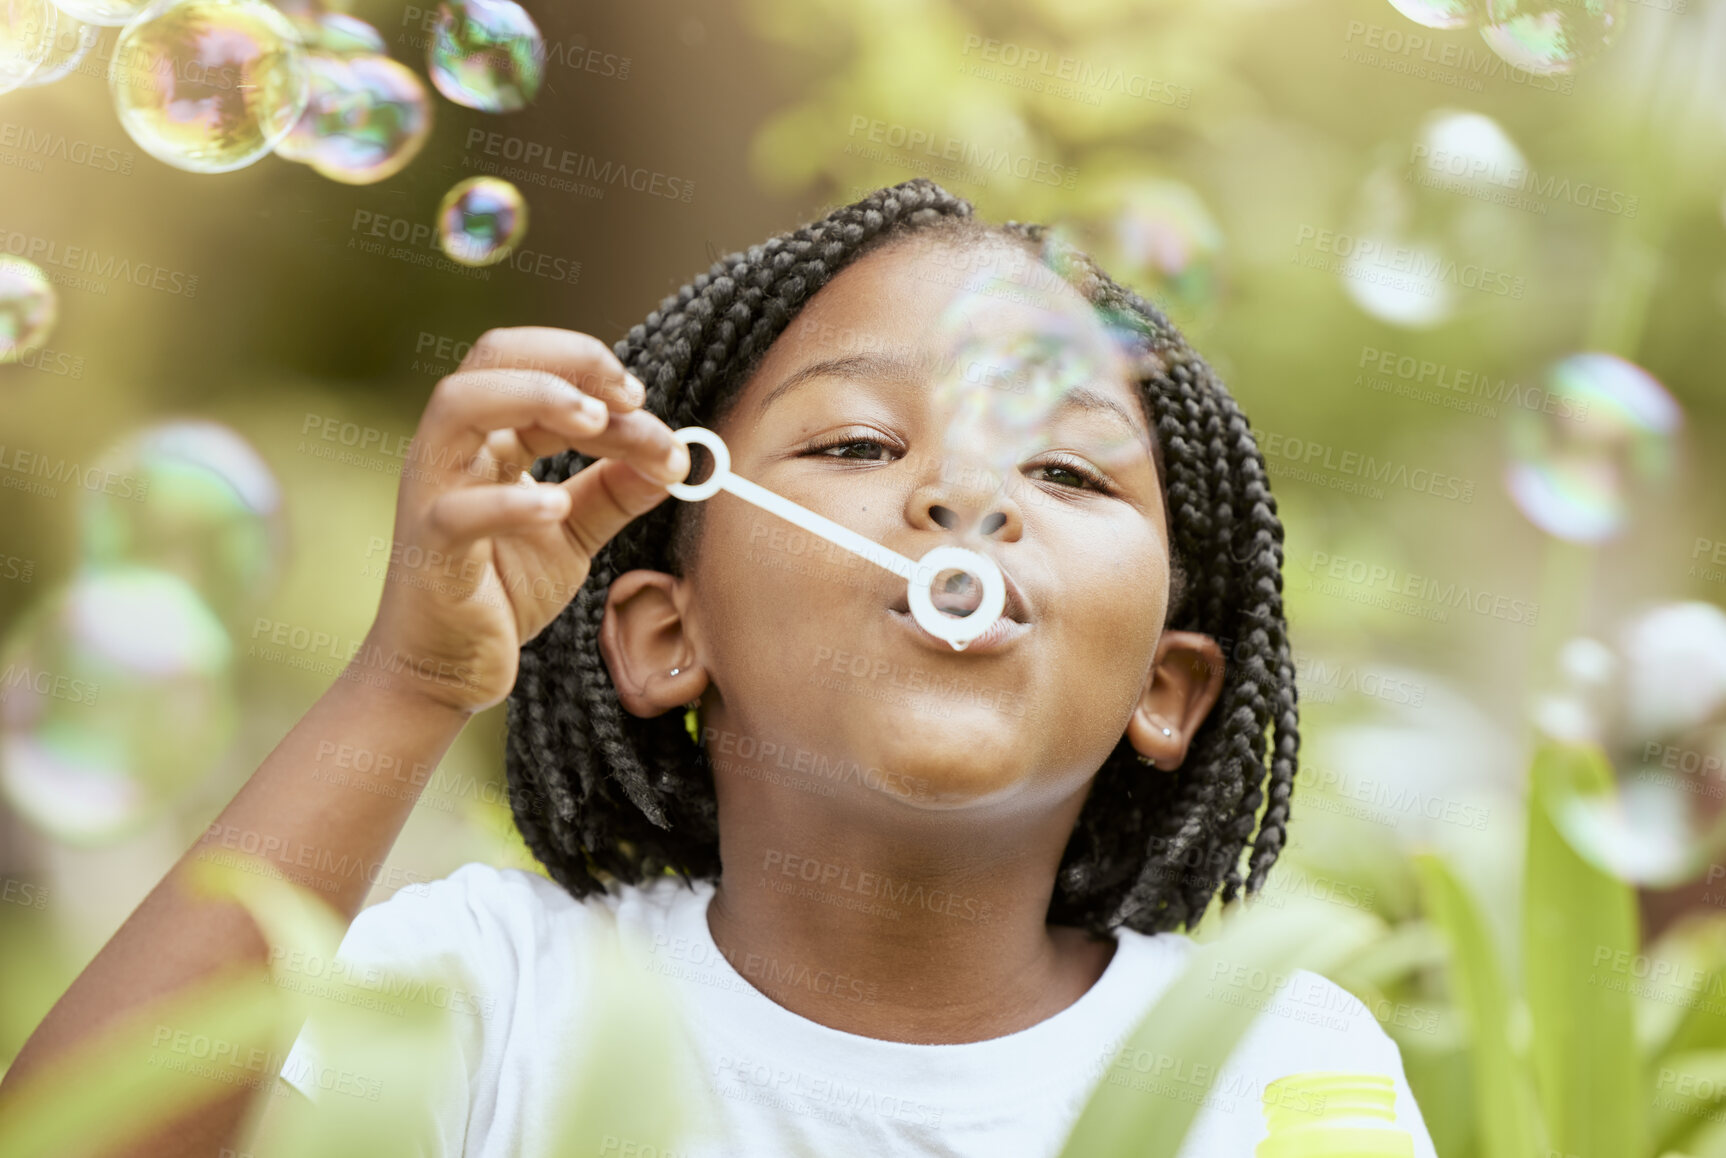 Buy stock photo Bubbles, playful and African girl in nature with freedom, smile and playing in a park. Spring, happy and carefree child with a bubble game in a backyard or field with plants for happiness and youth